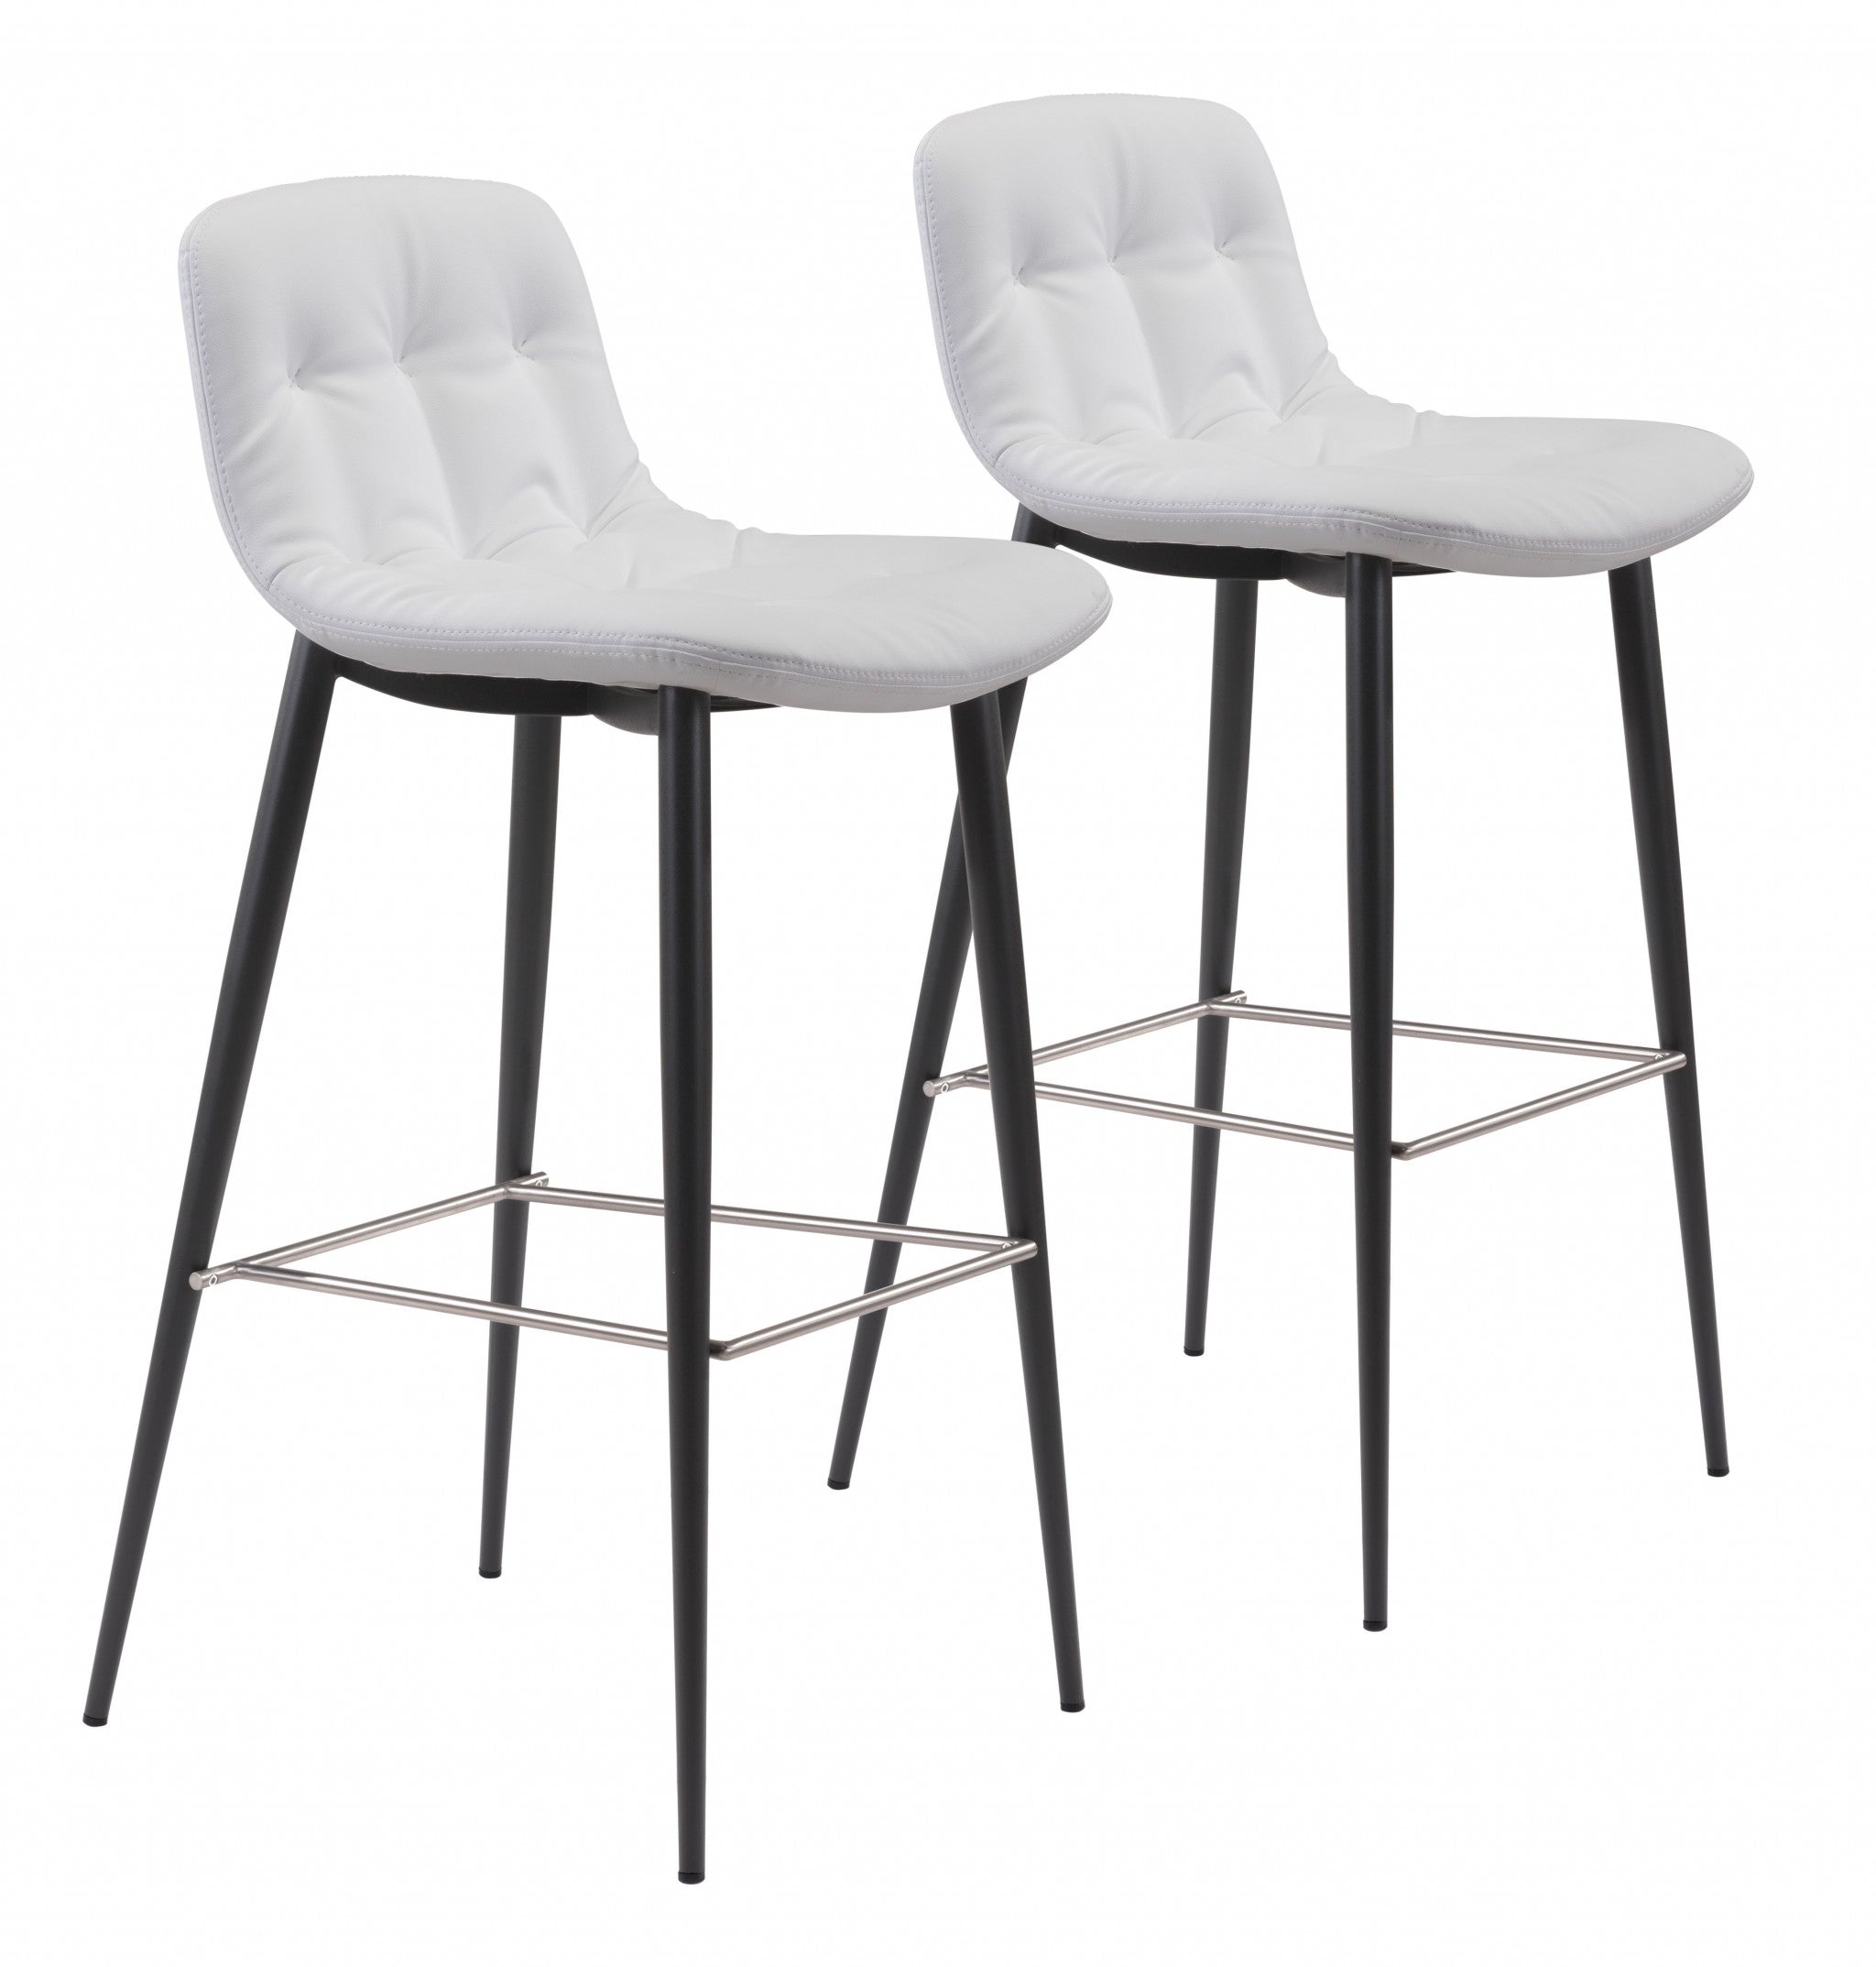 Set of Two 30" White And Black Steel Low Back Bar Height Bar Chairs